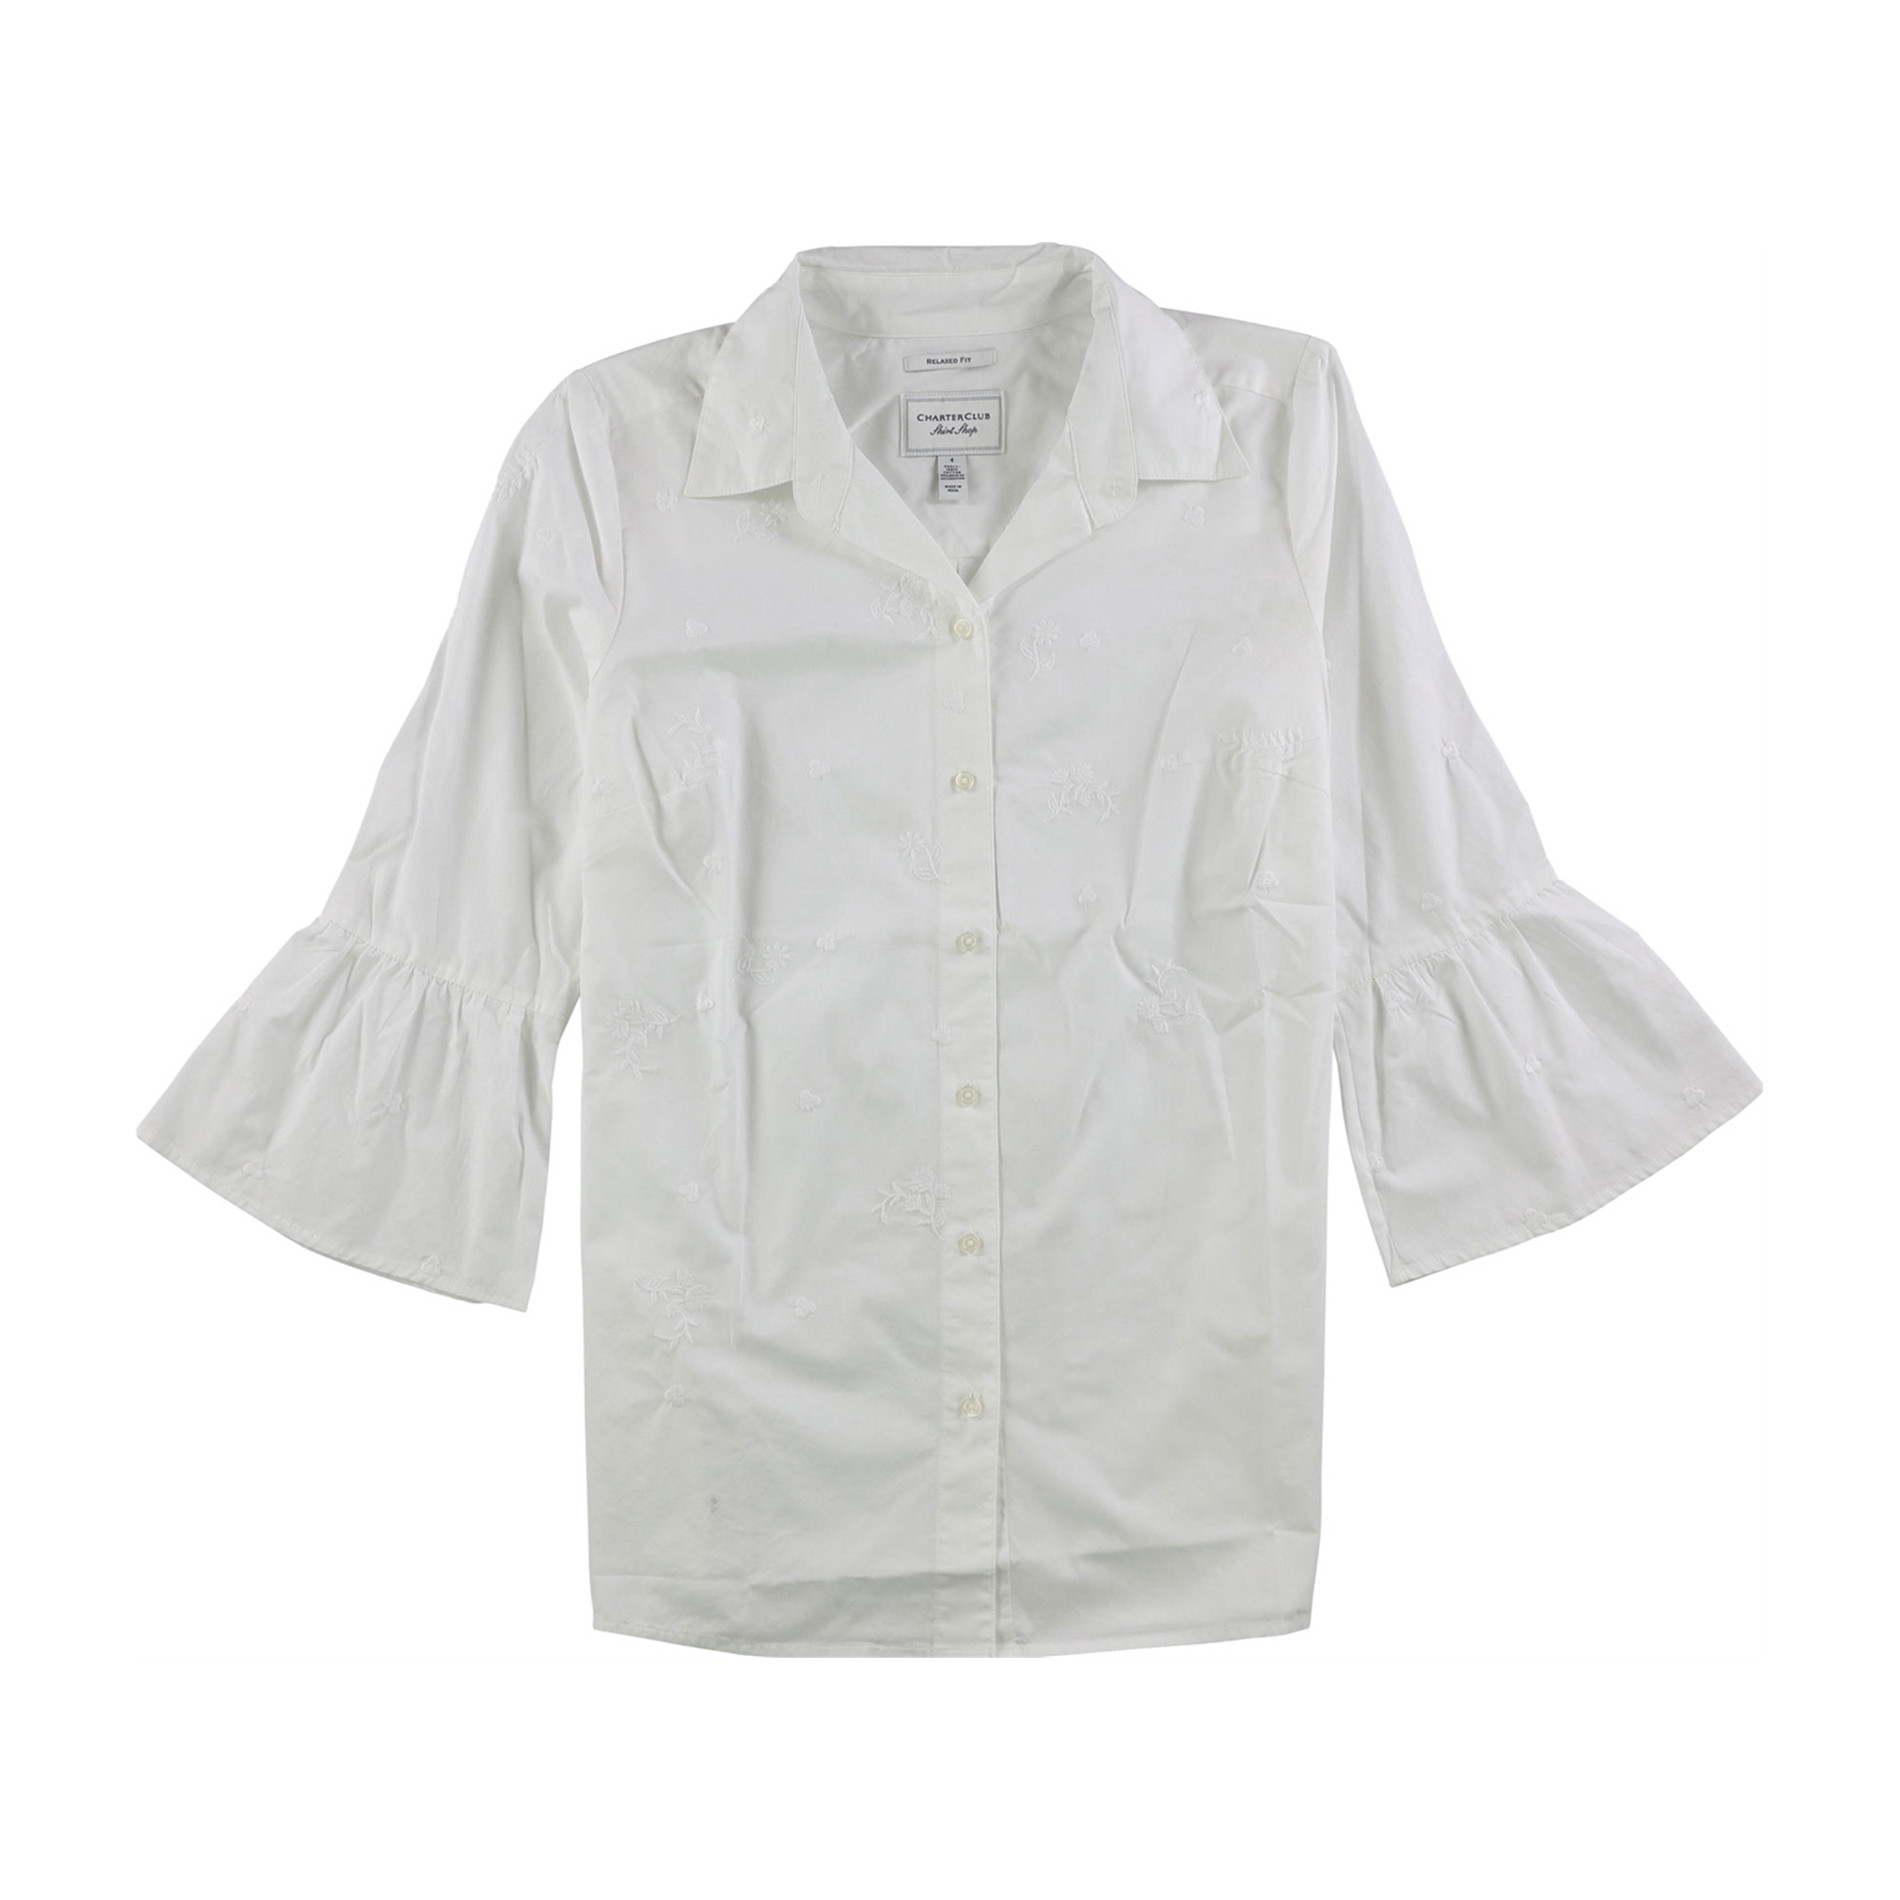 Charter Club Womens Embroidered Button Up Shirt